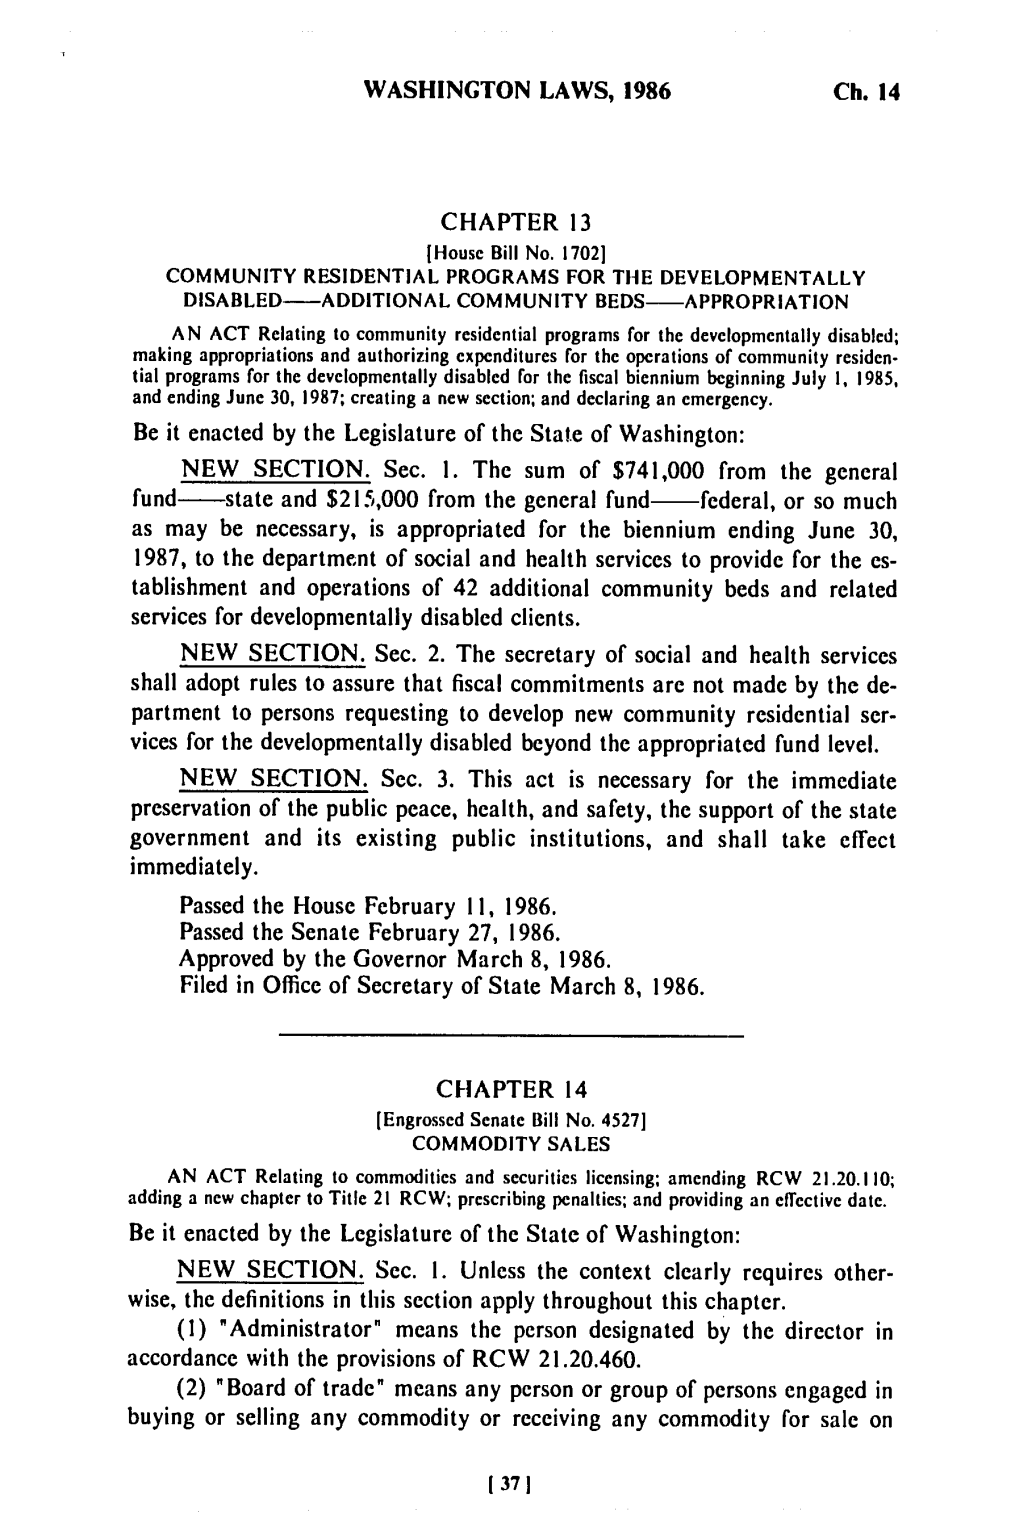 WASHINGTON LAWS, 1986 CHAPTER 13 Be It Enacted by the Legislature of the State of Washington: NEW SECTION. Sec. I. the Sum of $7